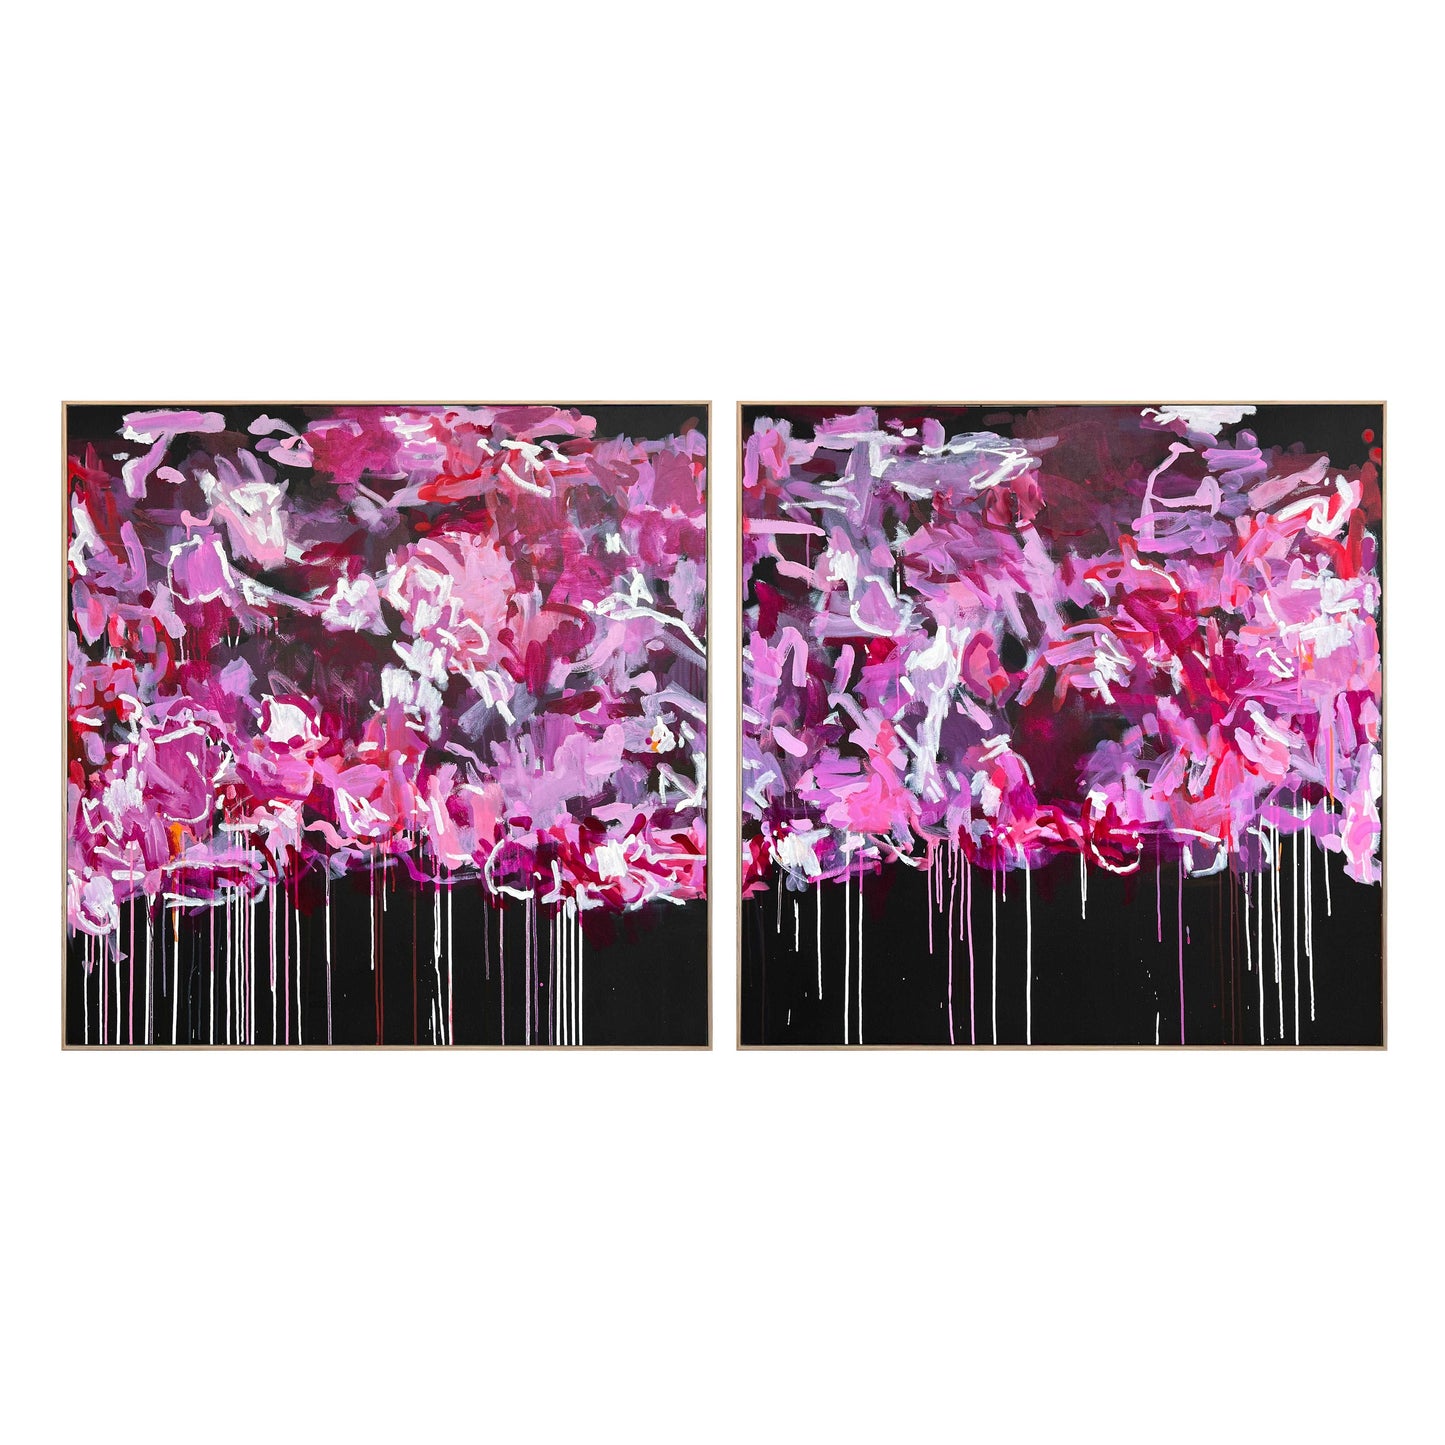 Entangle Me - Diptych